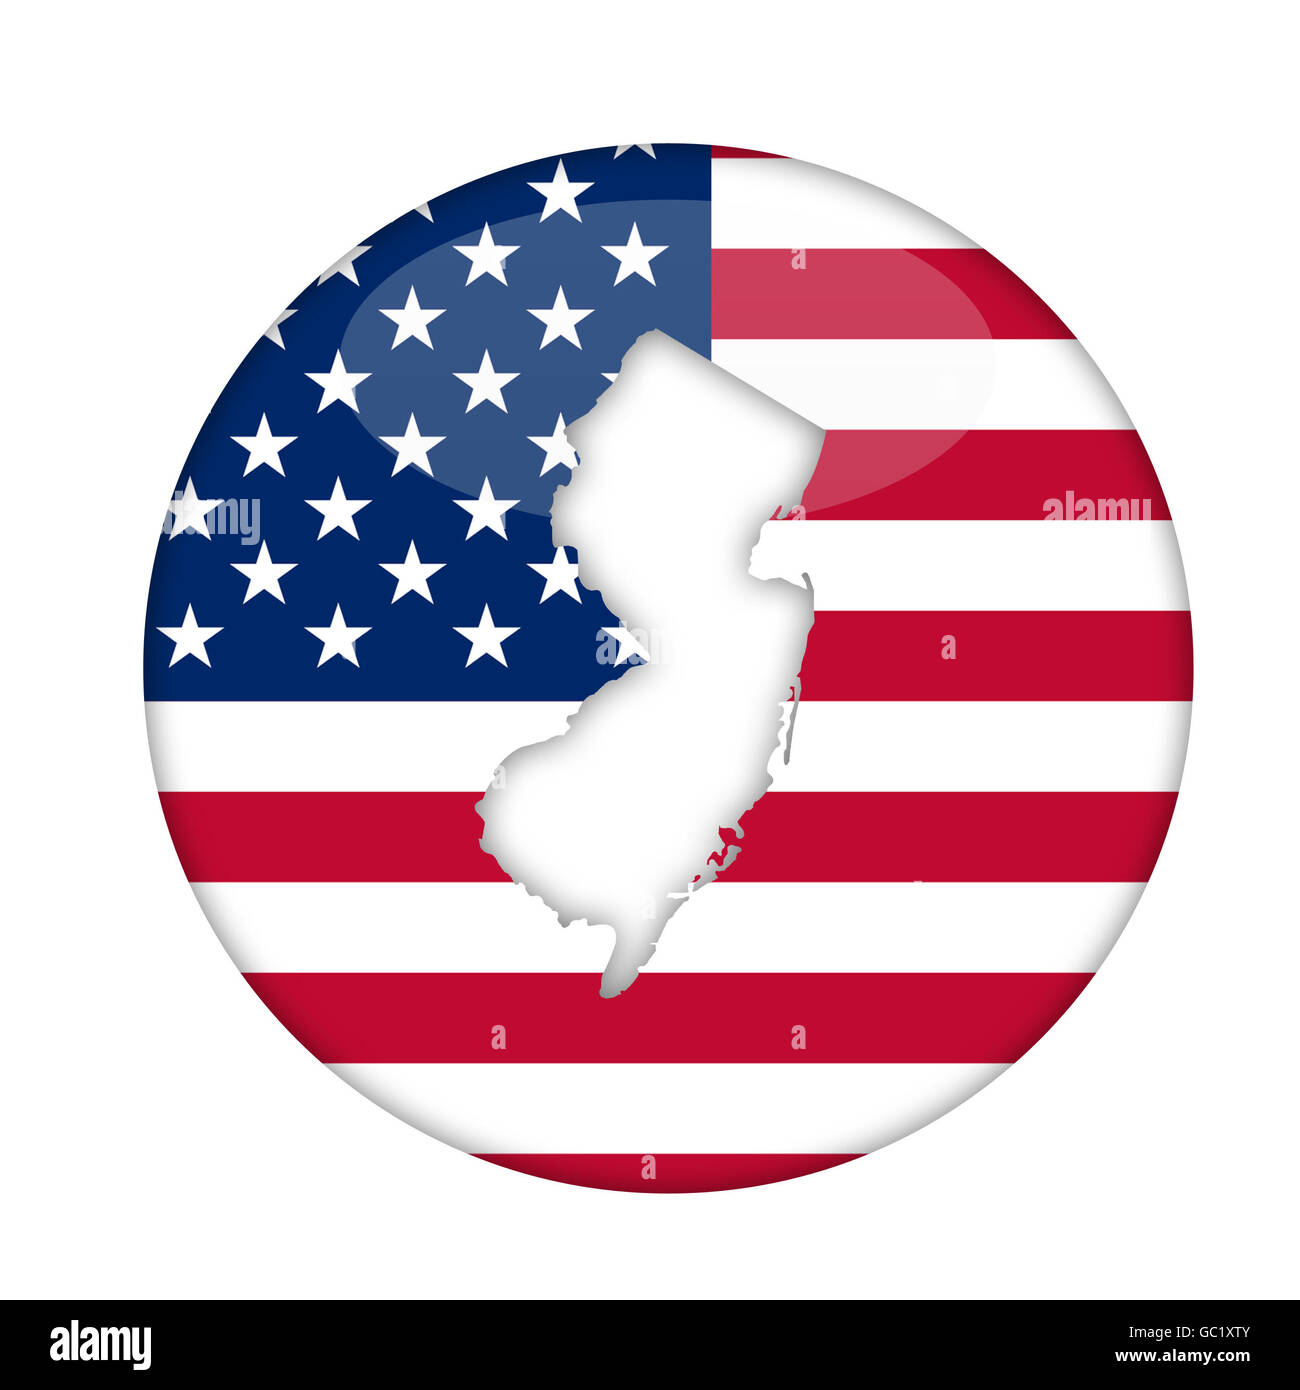 New Jersey state of America badge isolated on a white background. Stock Photo